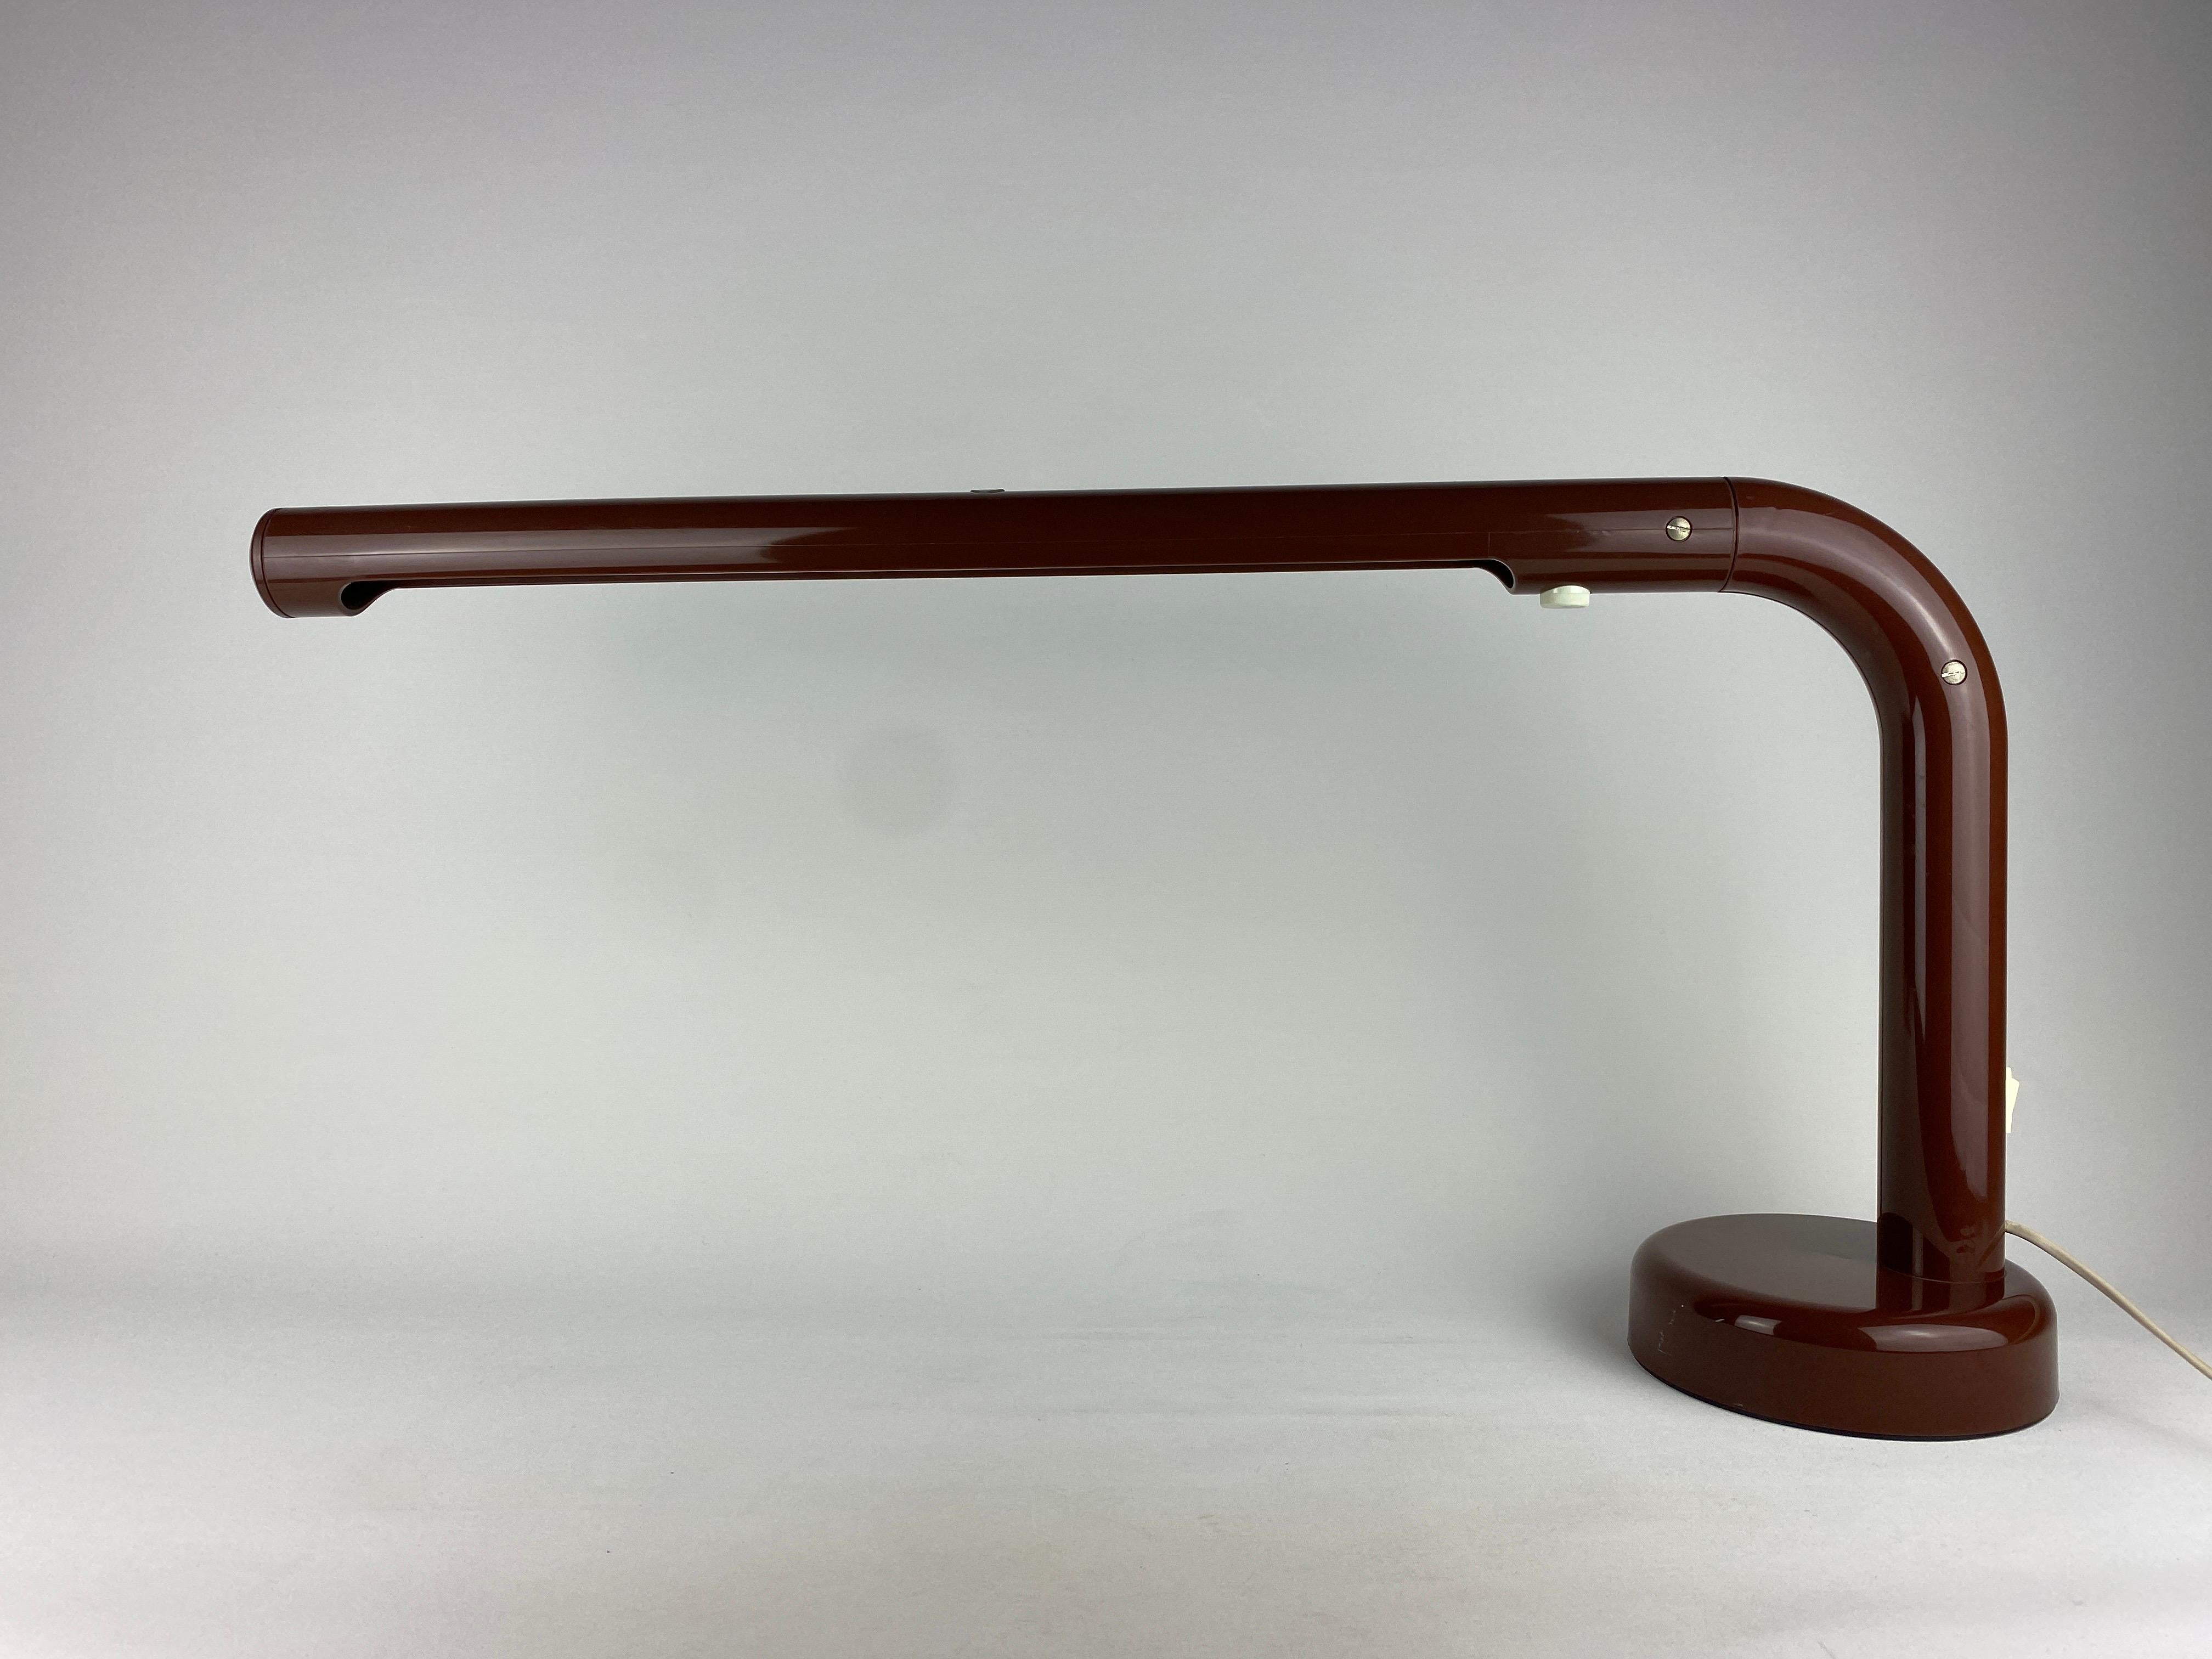 Cool brown desk light 'The Tube' designed by Anders Pehrson for Atelje Lyktan in 1973. 

A classic Swedish design from the 70's. Very cool sleek design that fits seamlessly into a modern but also retro interior due to its color.

Provides